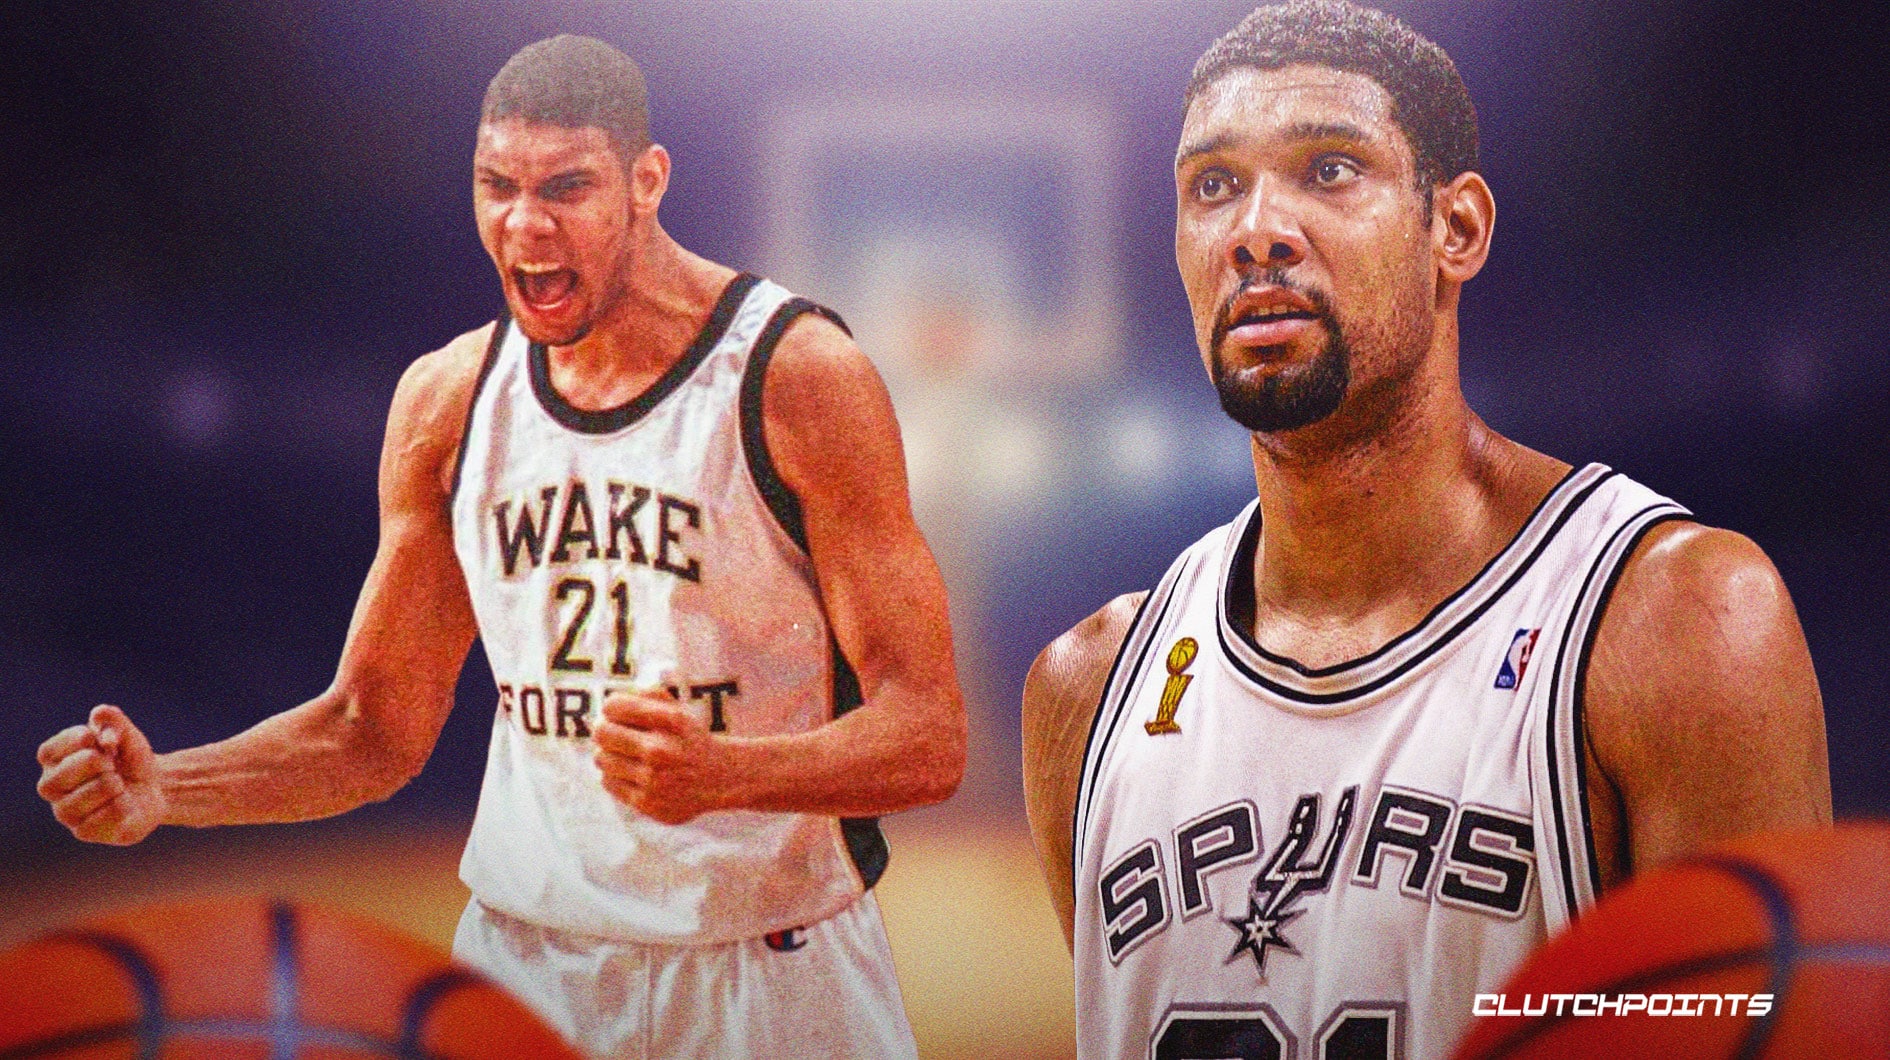 Tim Duncan in San Antonio Spurs jersey and in Wake Forest jersey